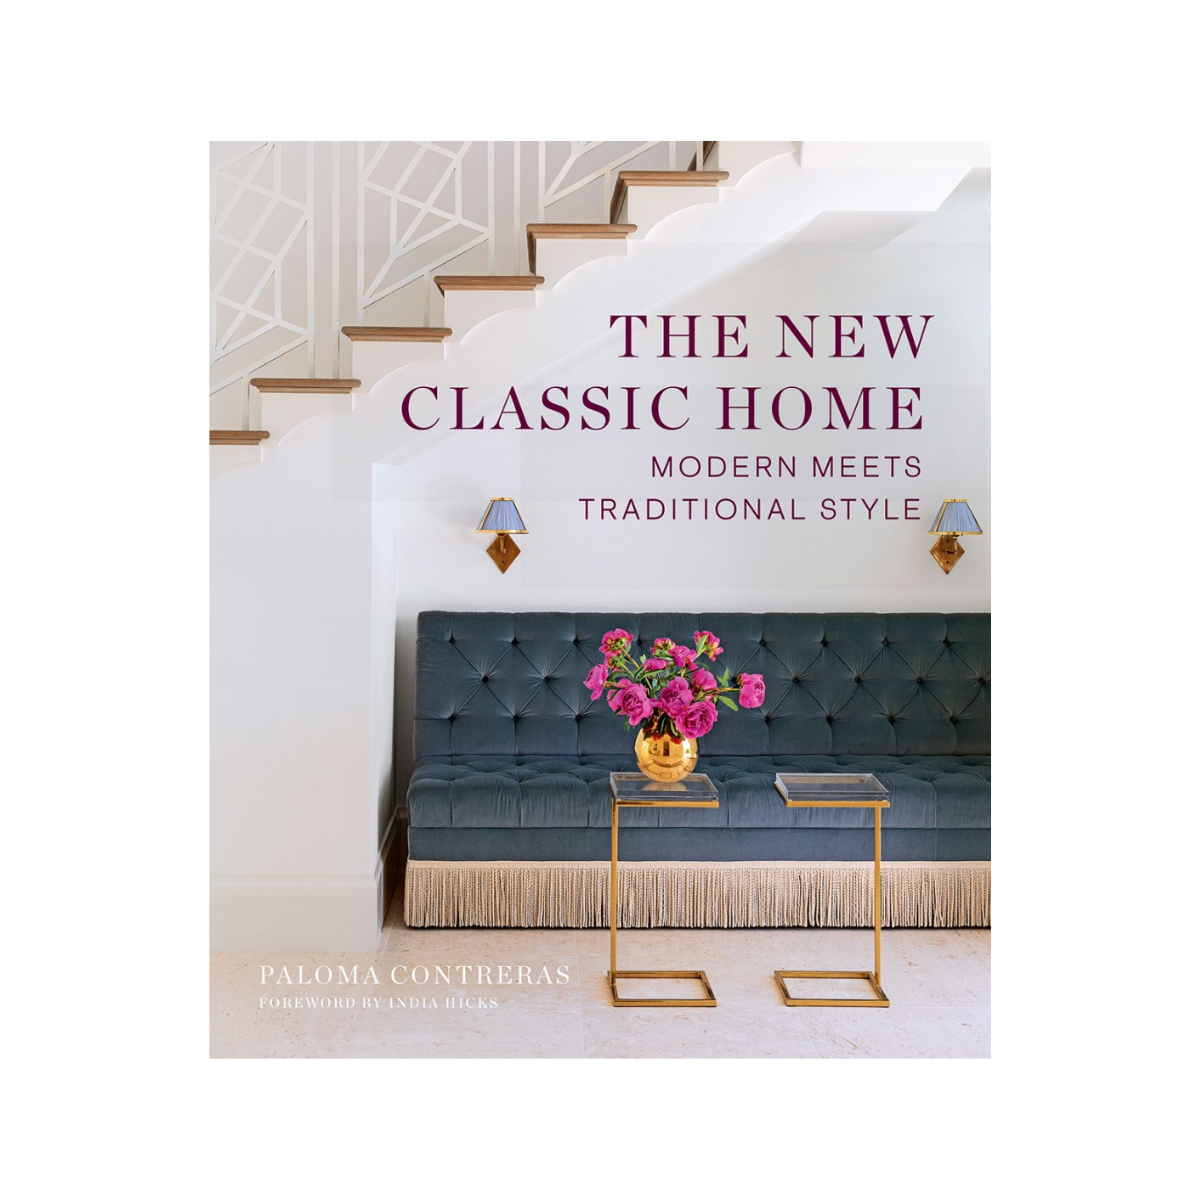 "The New Classic Home"